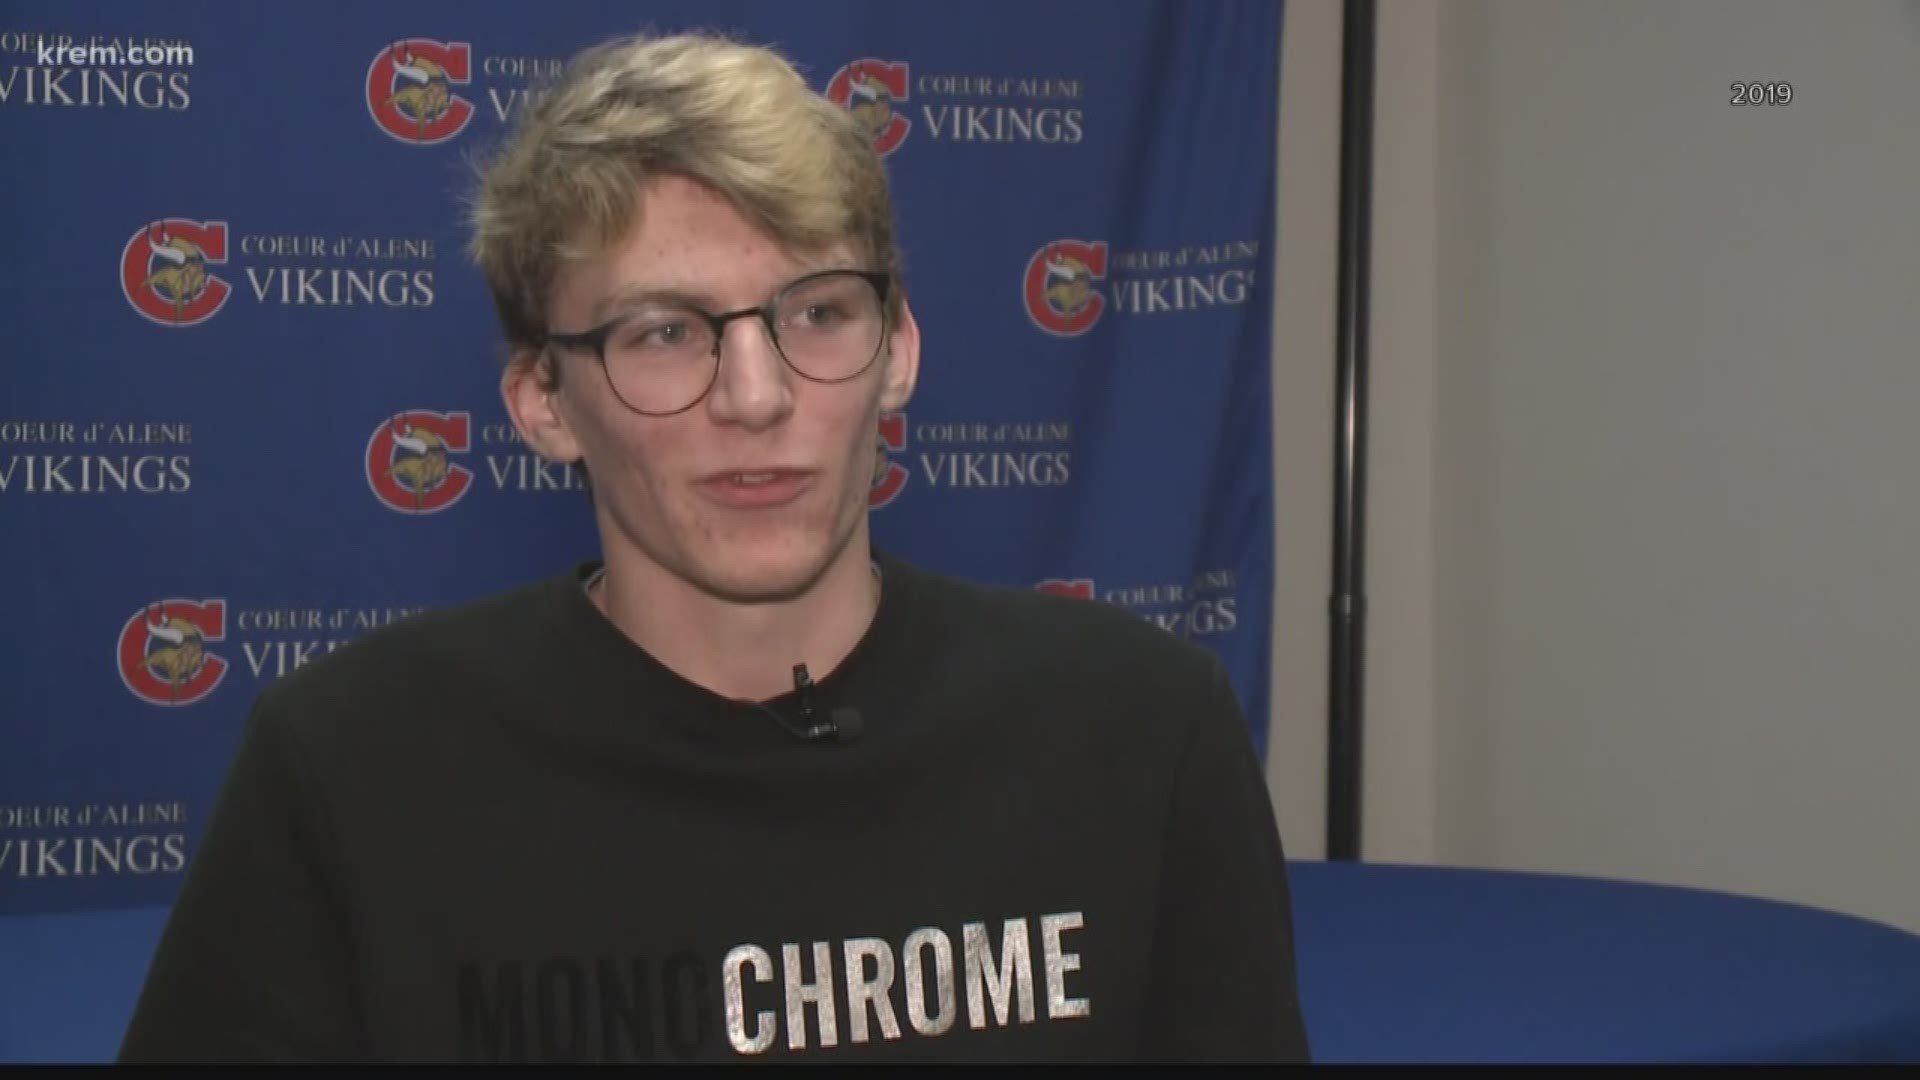 Morgan Dixon at Coeur d'Alene High School made headlines before with a smartphone app he created. Now, he's started a non-profit to help schools get tech devices.